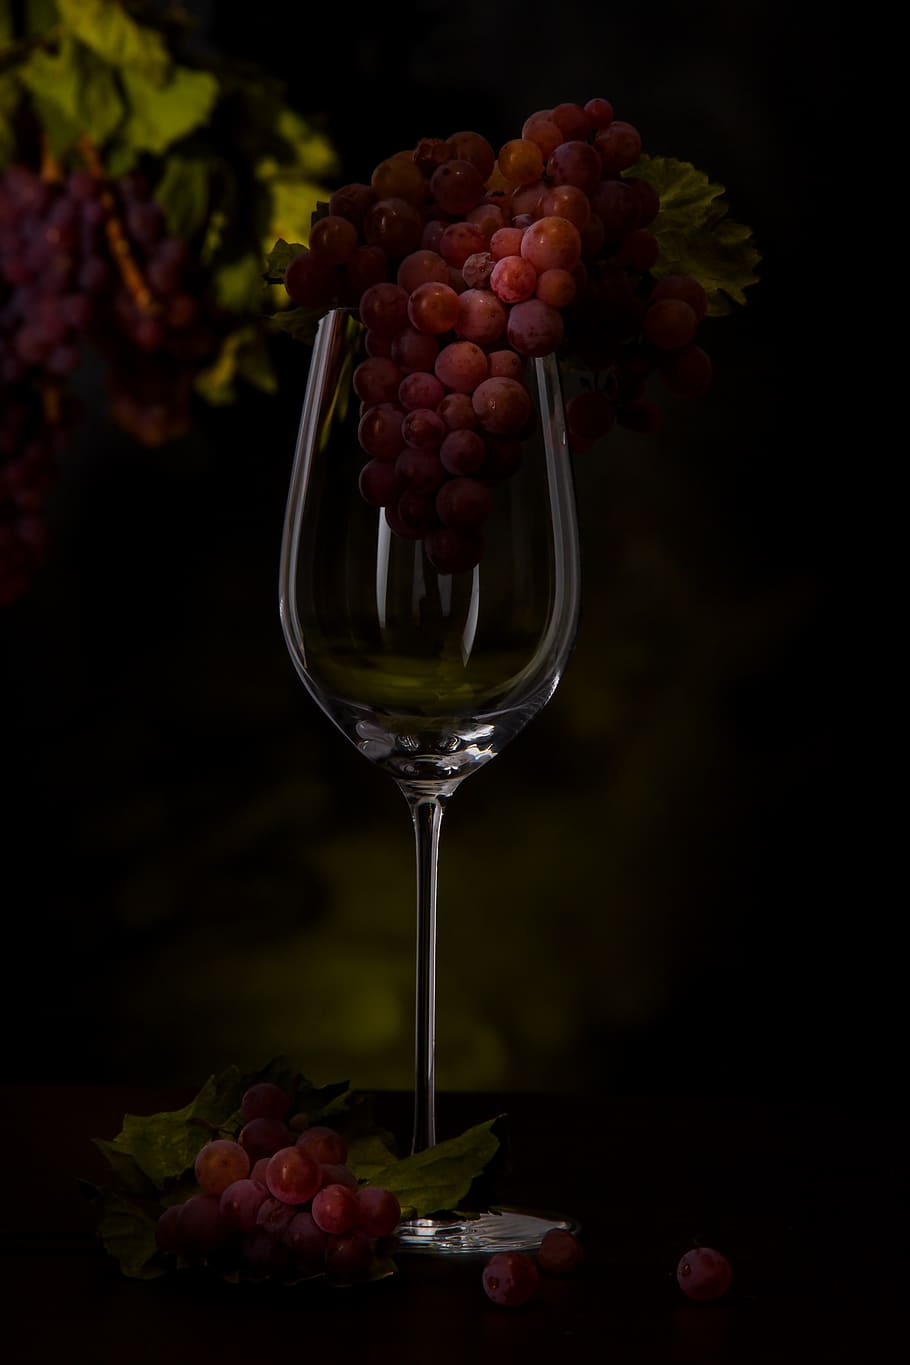 grapes, wine glass, vines, vintage, drink, fruit, autumn, winegrowing